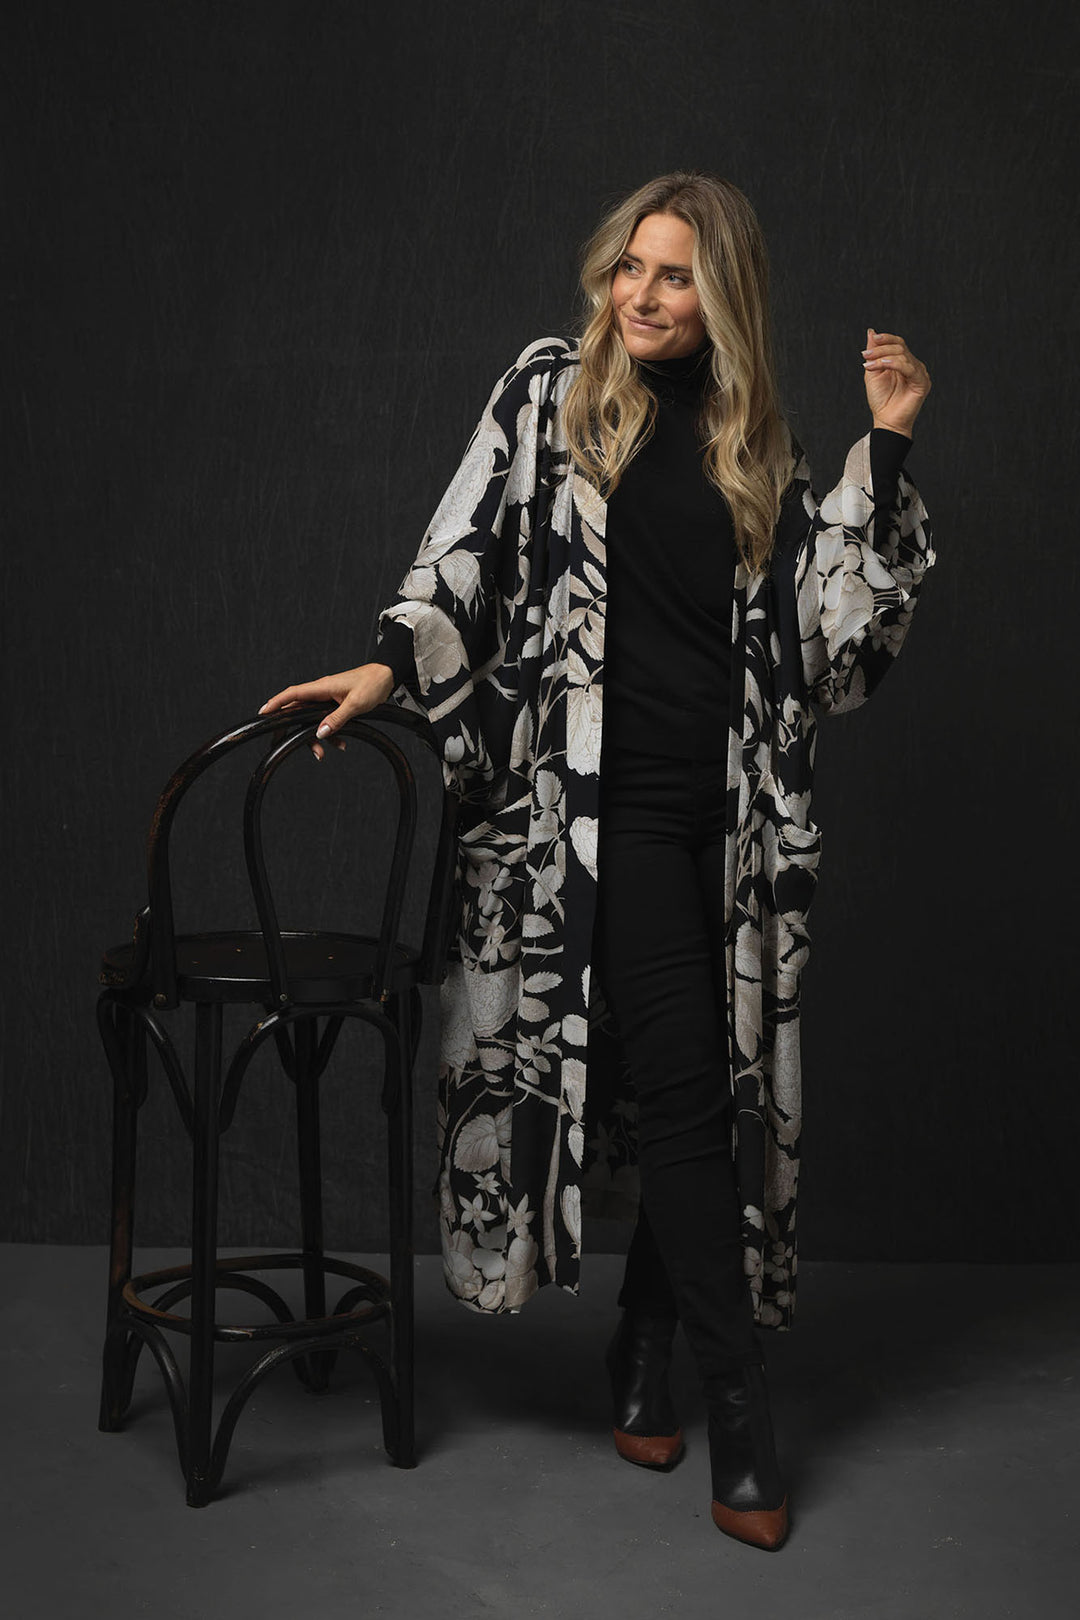 Rosebush Black Crepe Long Kimono- This kimono can be worn two ways, when tied at the back it makes a chic open fronted jacket. Alternatively, it can be worn tied at the front as a closed jacket or dress and secured using the interior waist tie. 